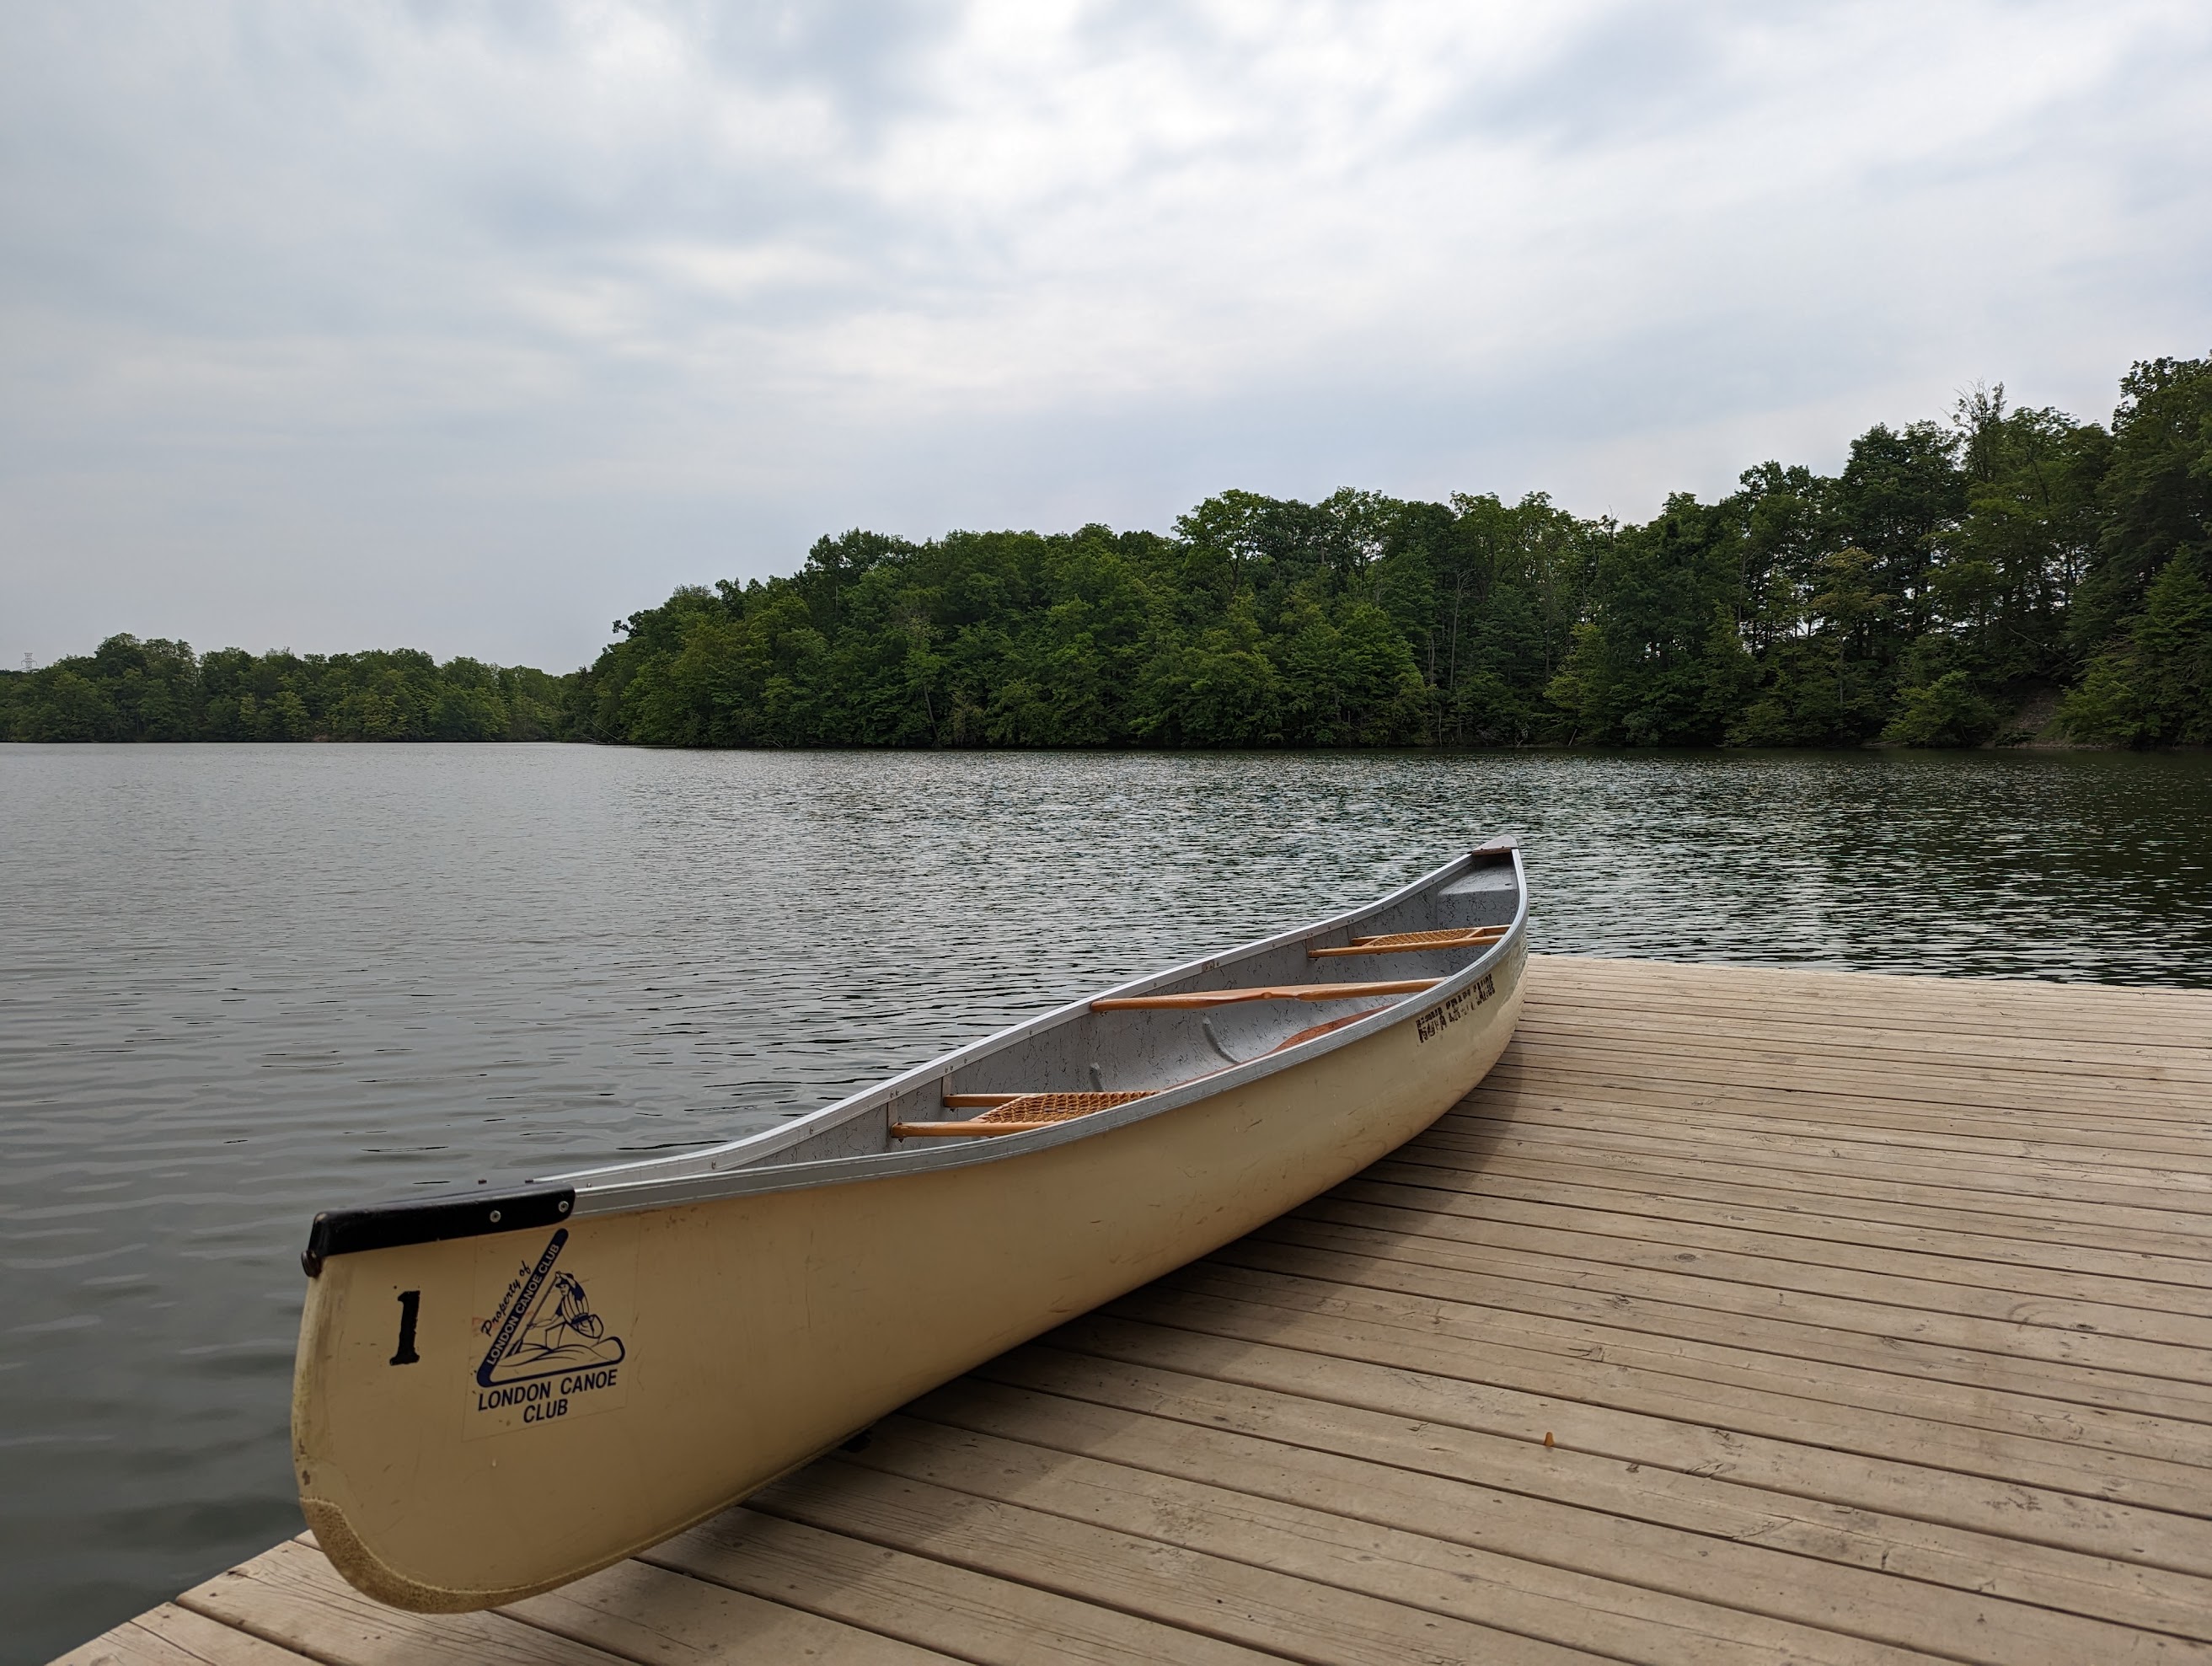 A Canoe Club canoe sitting on the dock at Sharon Creek Conservation Area